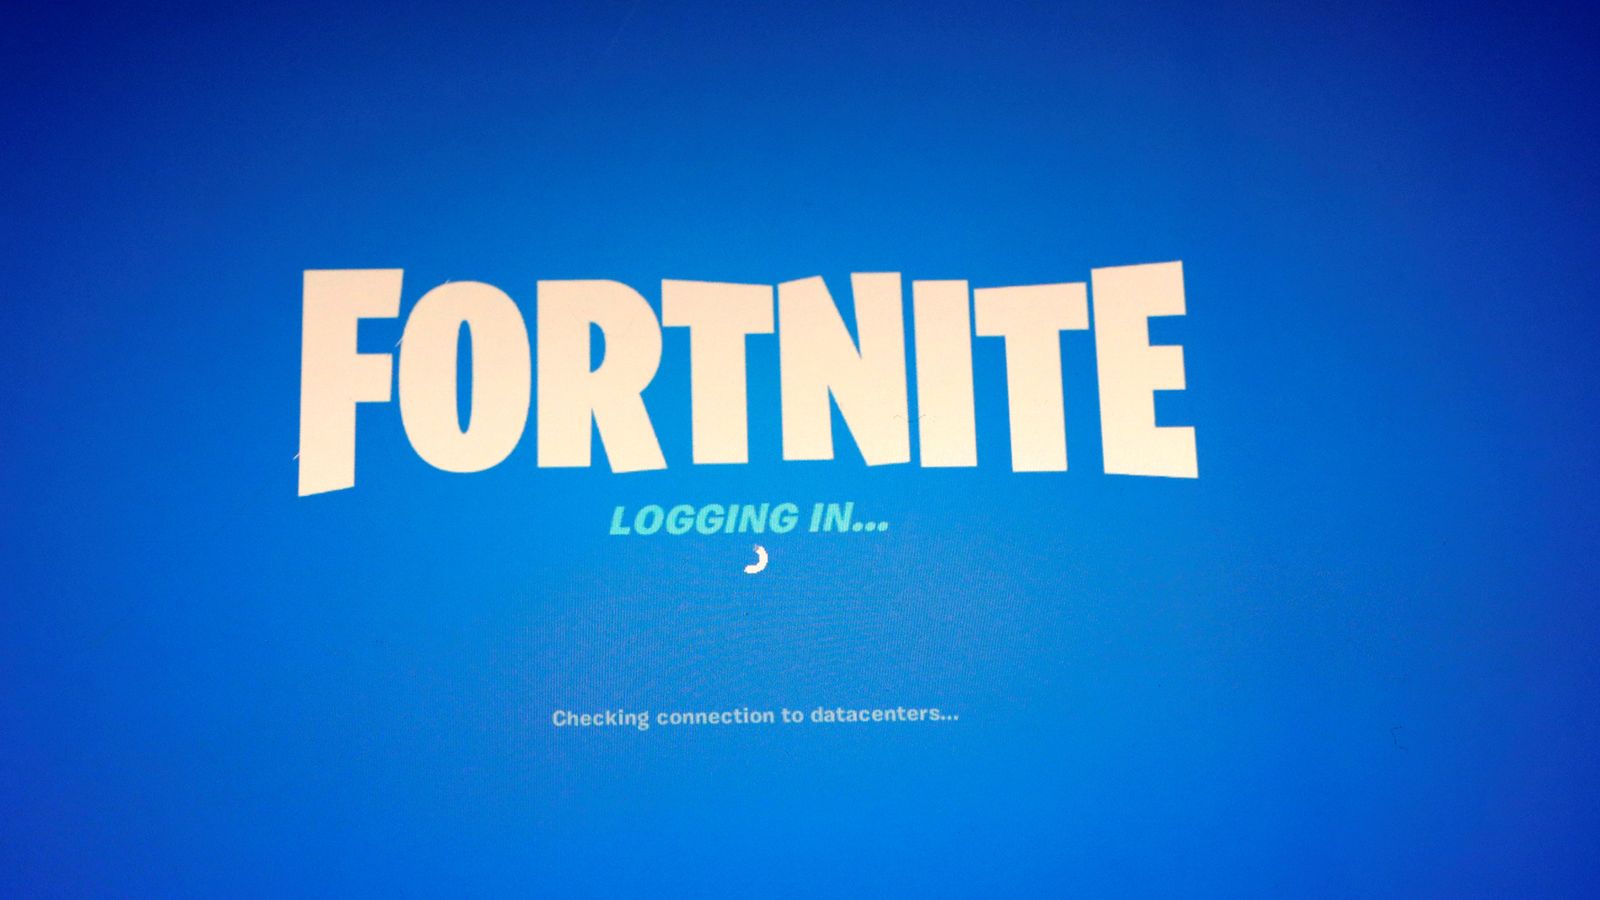 Parents whose kids made purchases on Fortnite without them knowing could soon get refunds